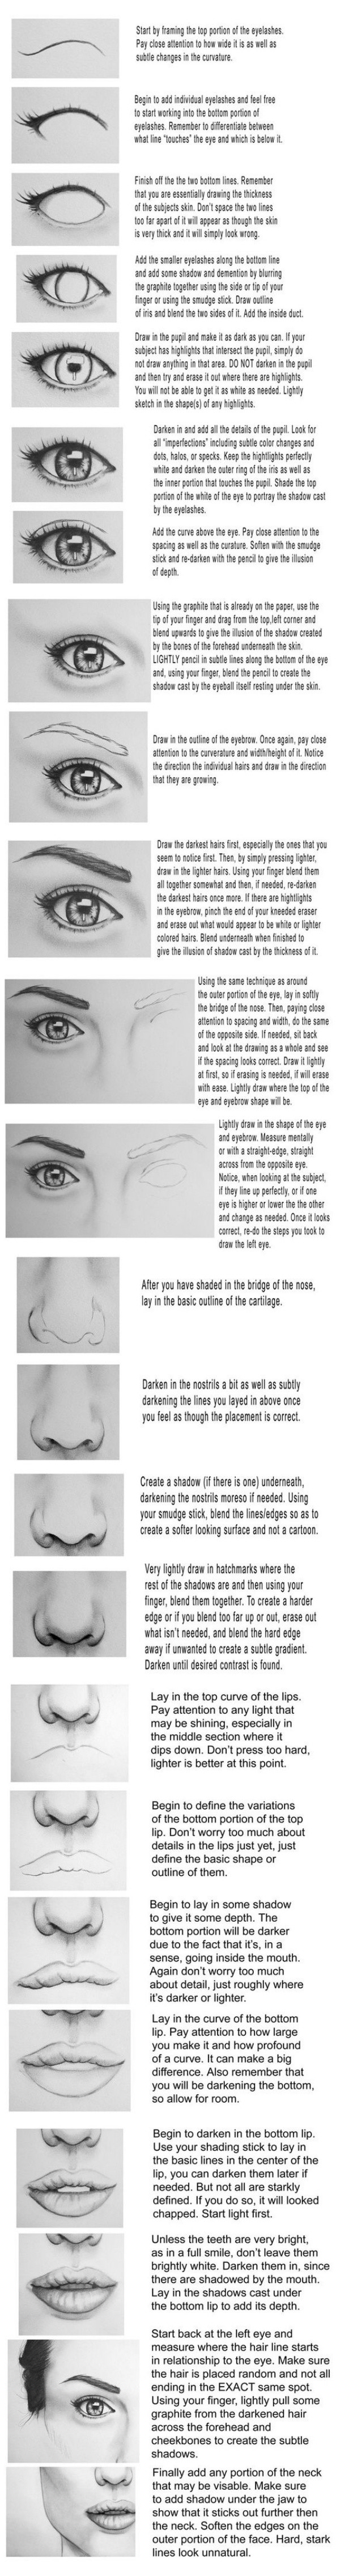 how-to-draw-an-eye3